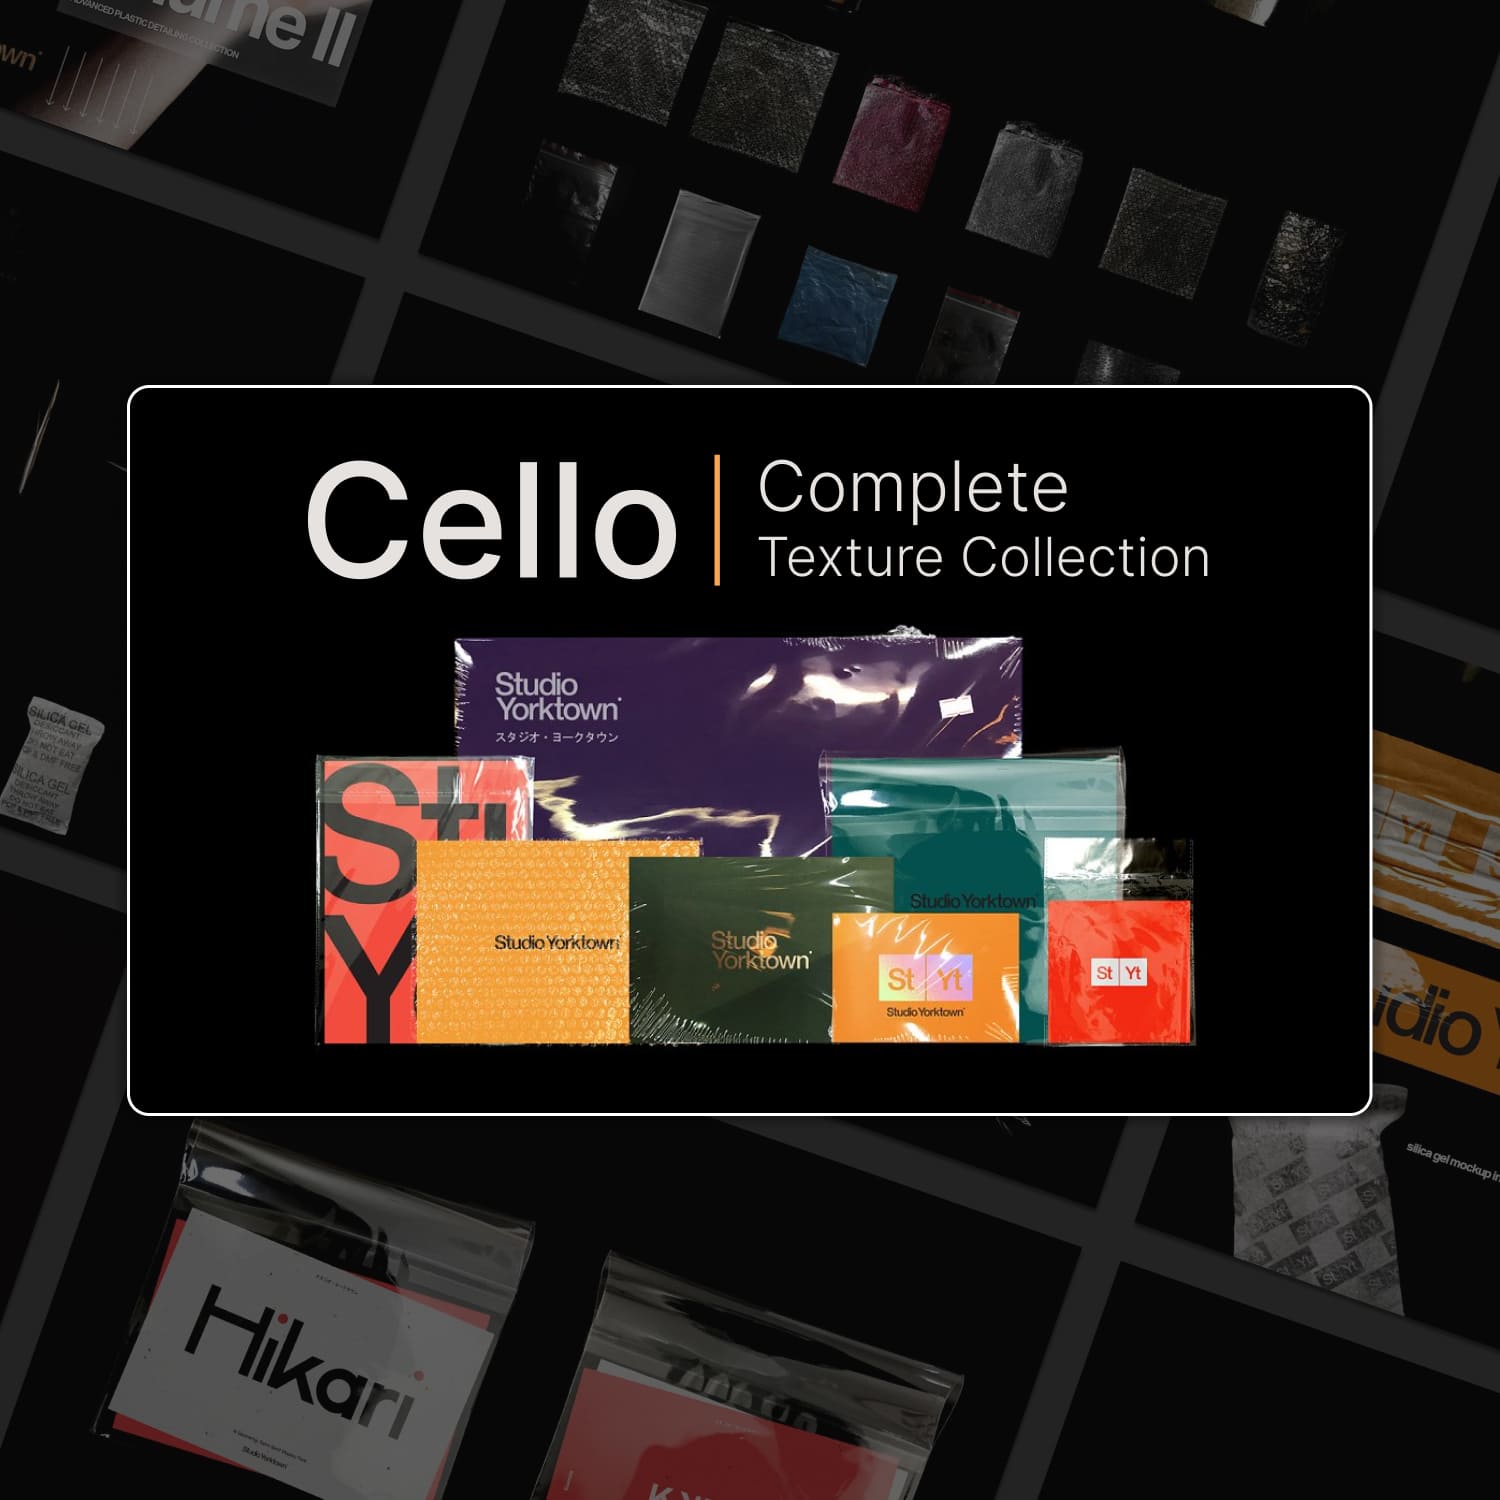 Cello COMPLETE Texture Collection - main image preview.